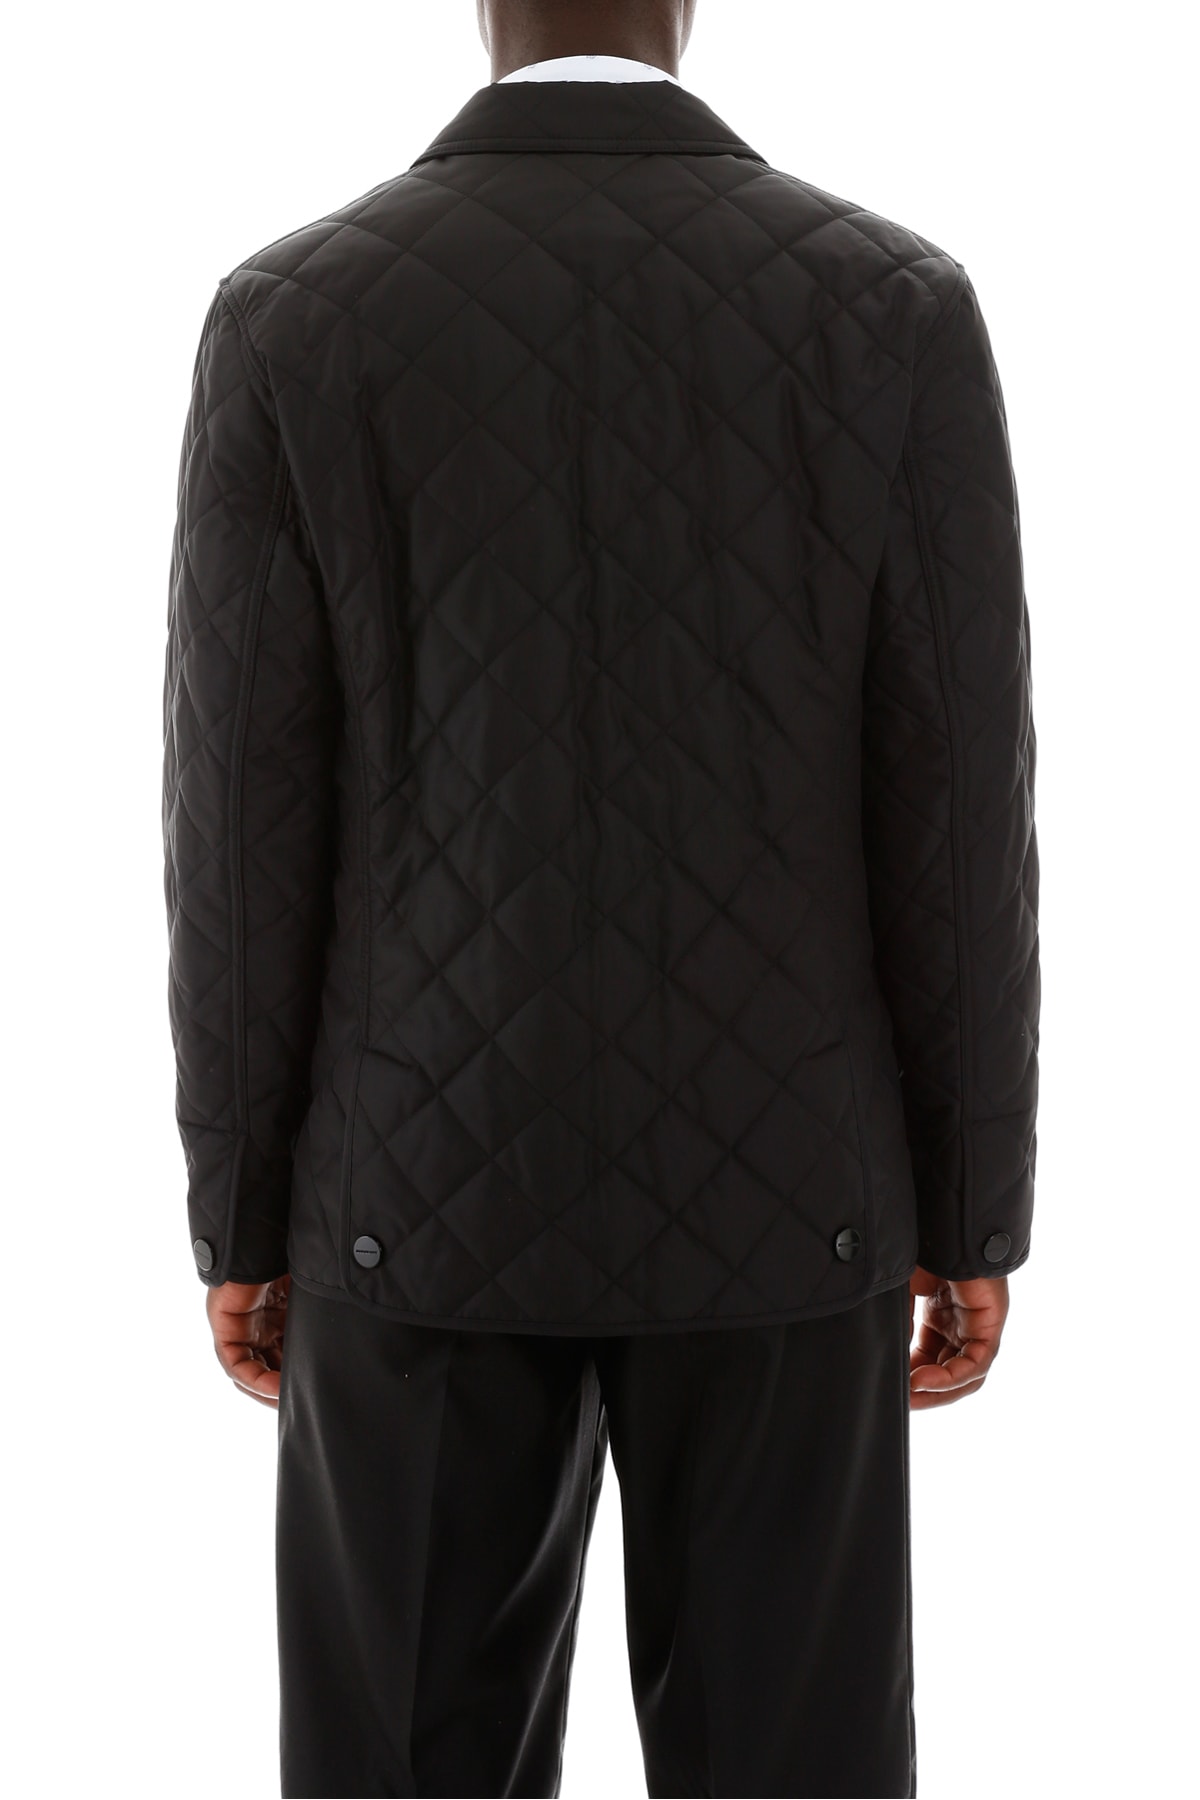 burberry clifton quilted blazer